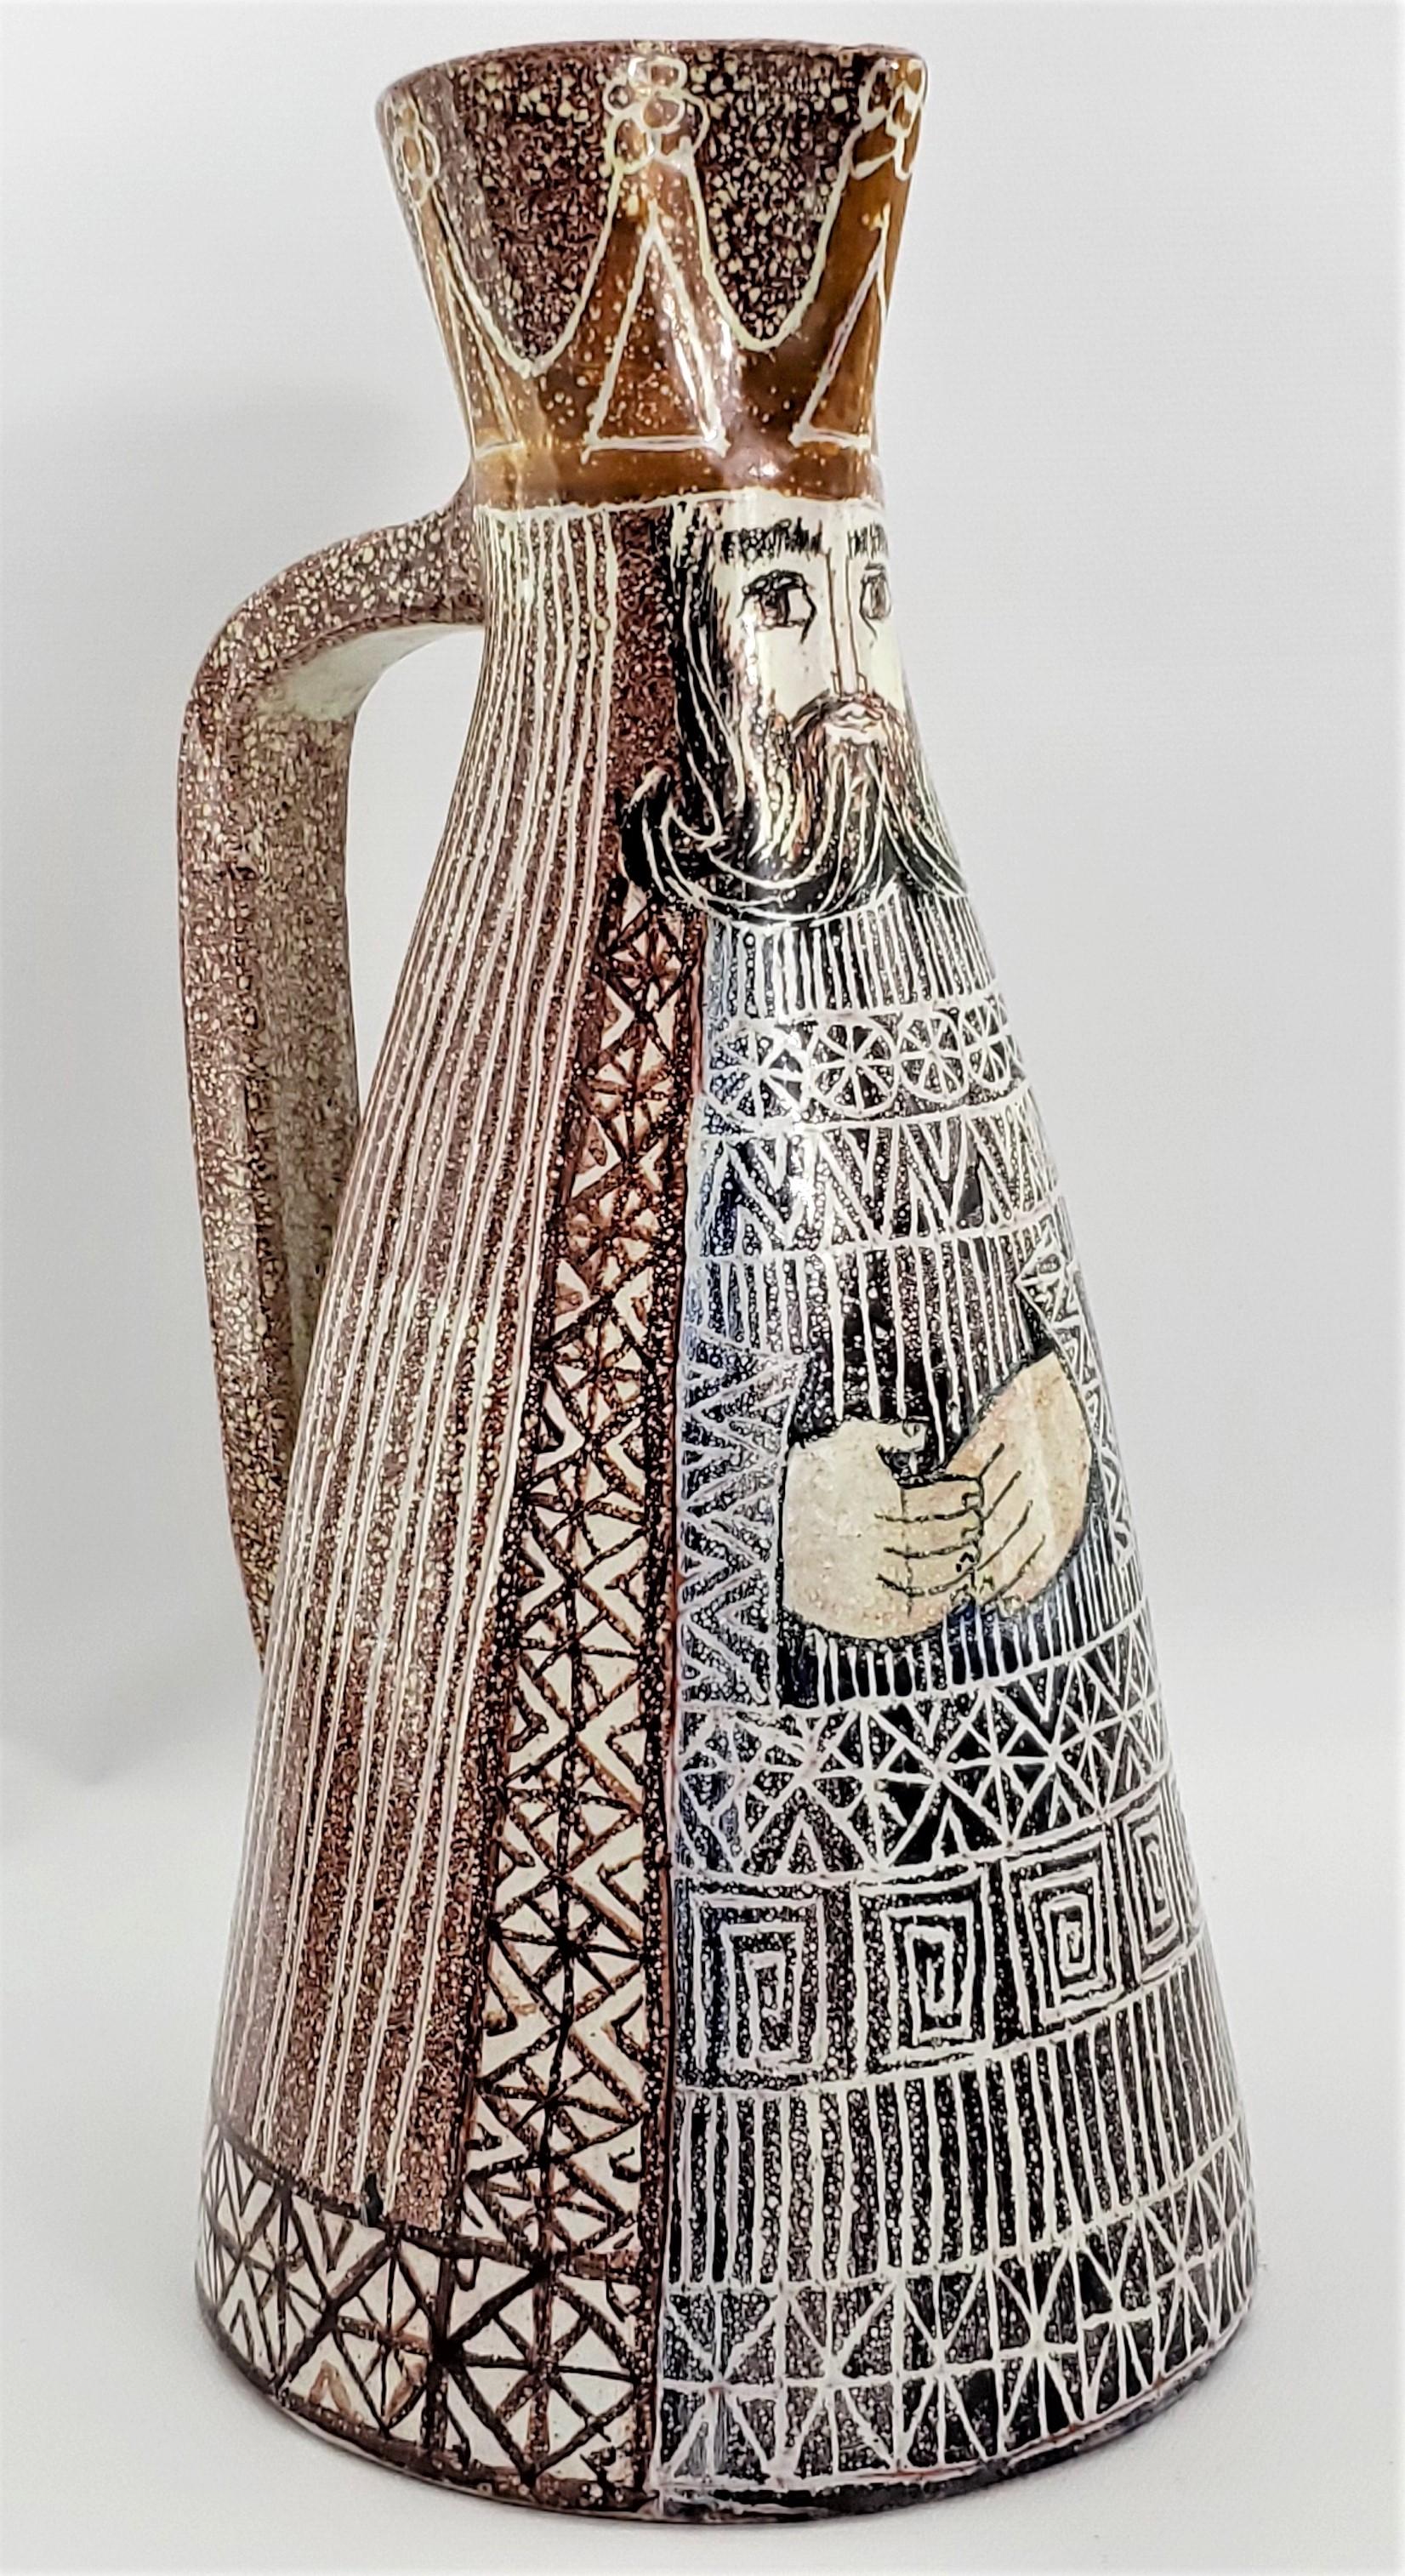 Remarkable Alfaraz decorative pitcher designed by Renowned Spanish ceramicist artists: Miguel DURAN-LORIGA and Jesus MARTITEGUI, circa 1960s. This particular pitcher was never used and is considered 